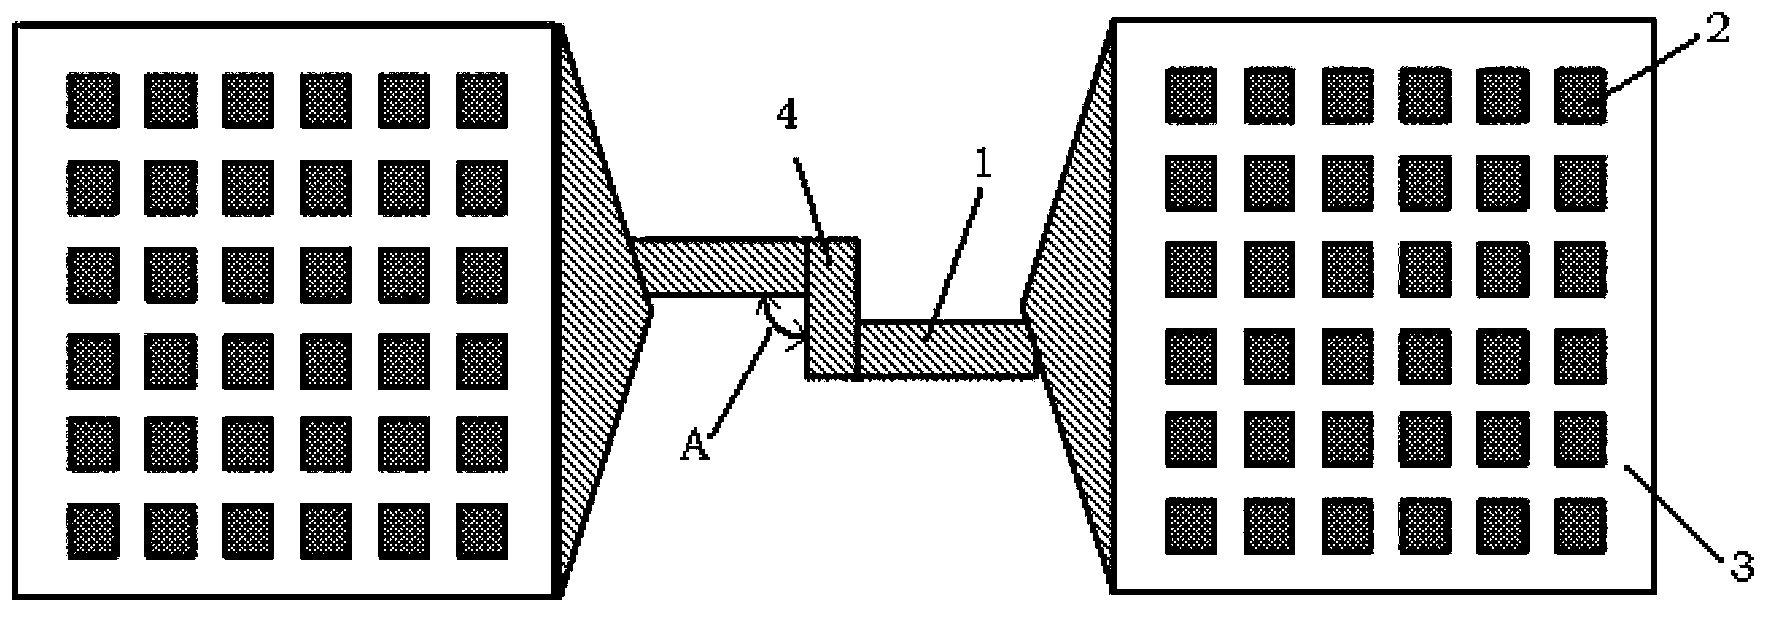 Electrically programmable metal fuse device structure